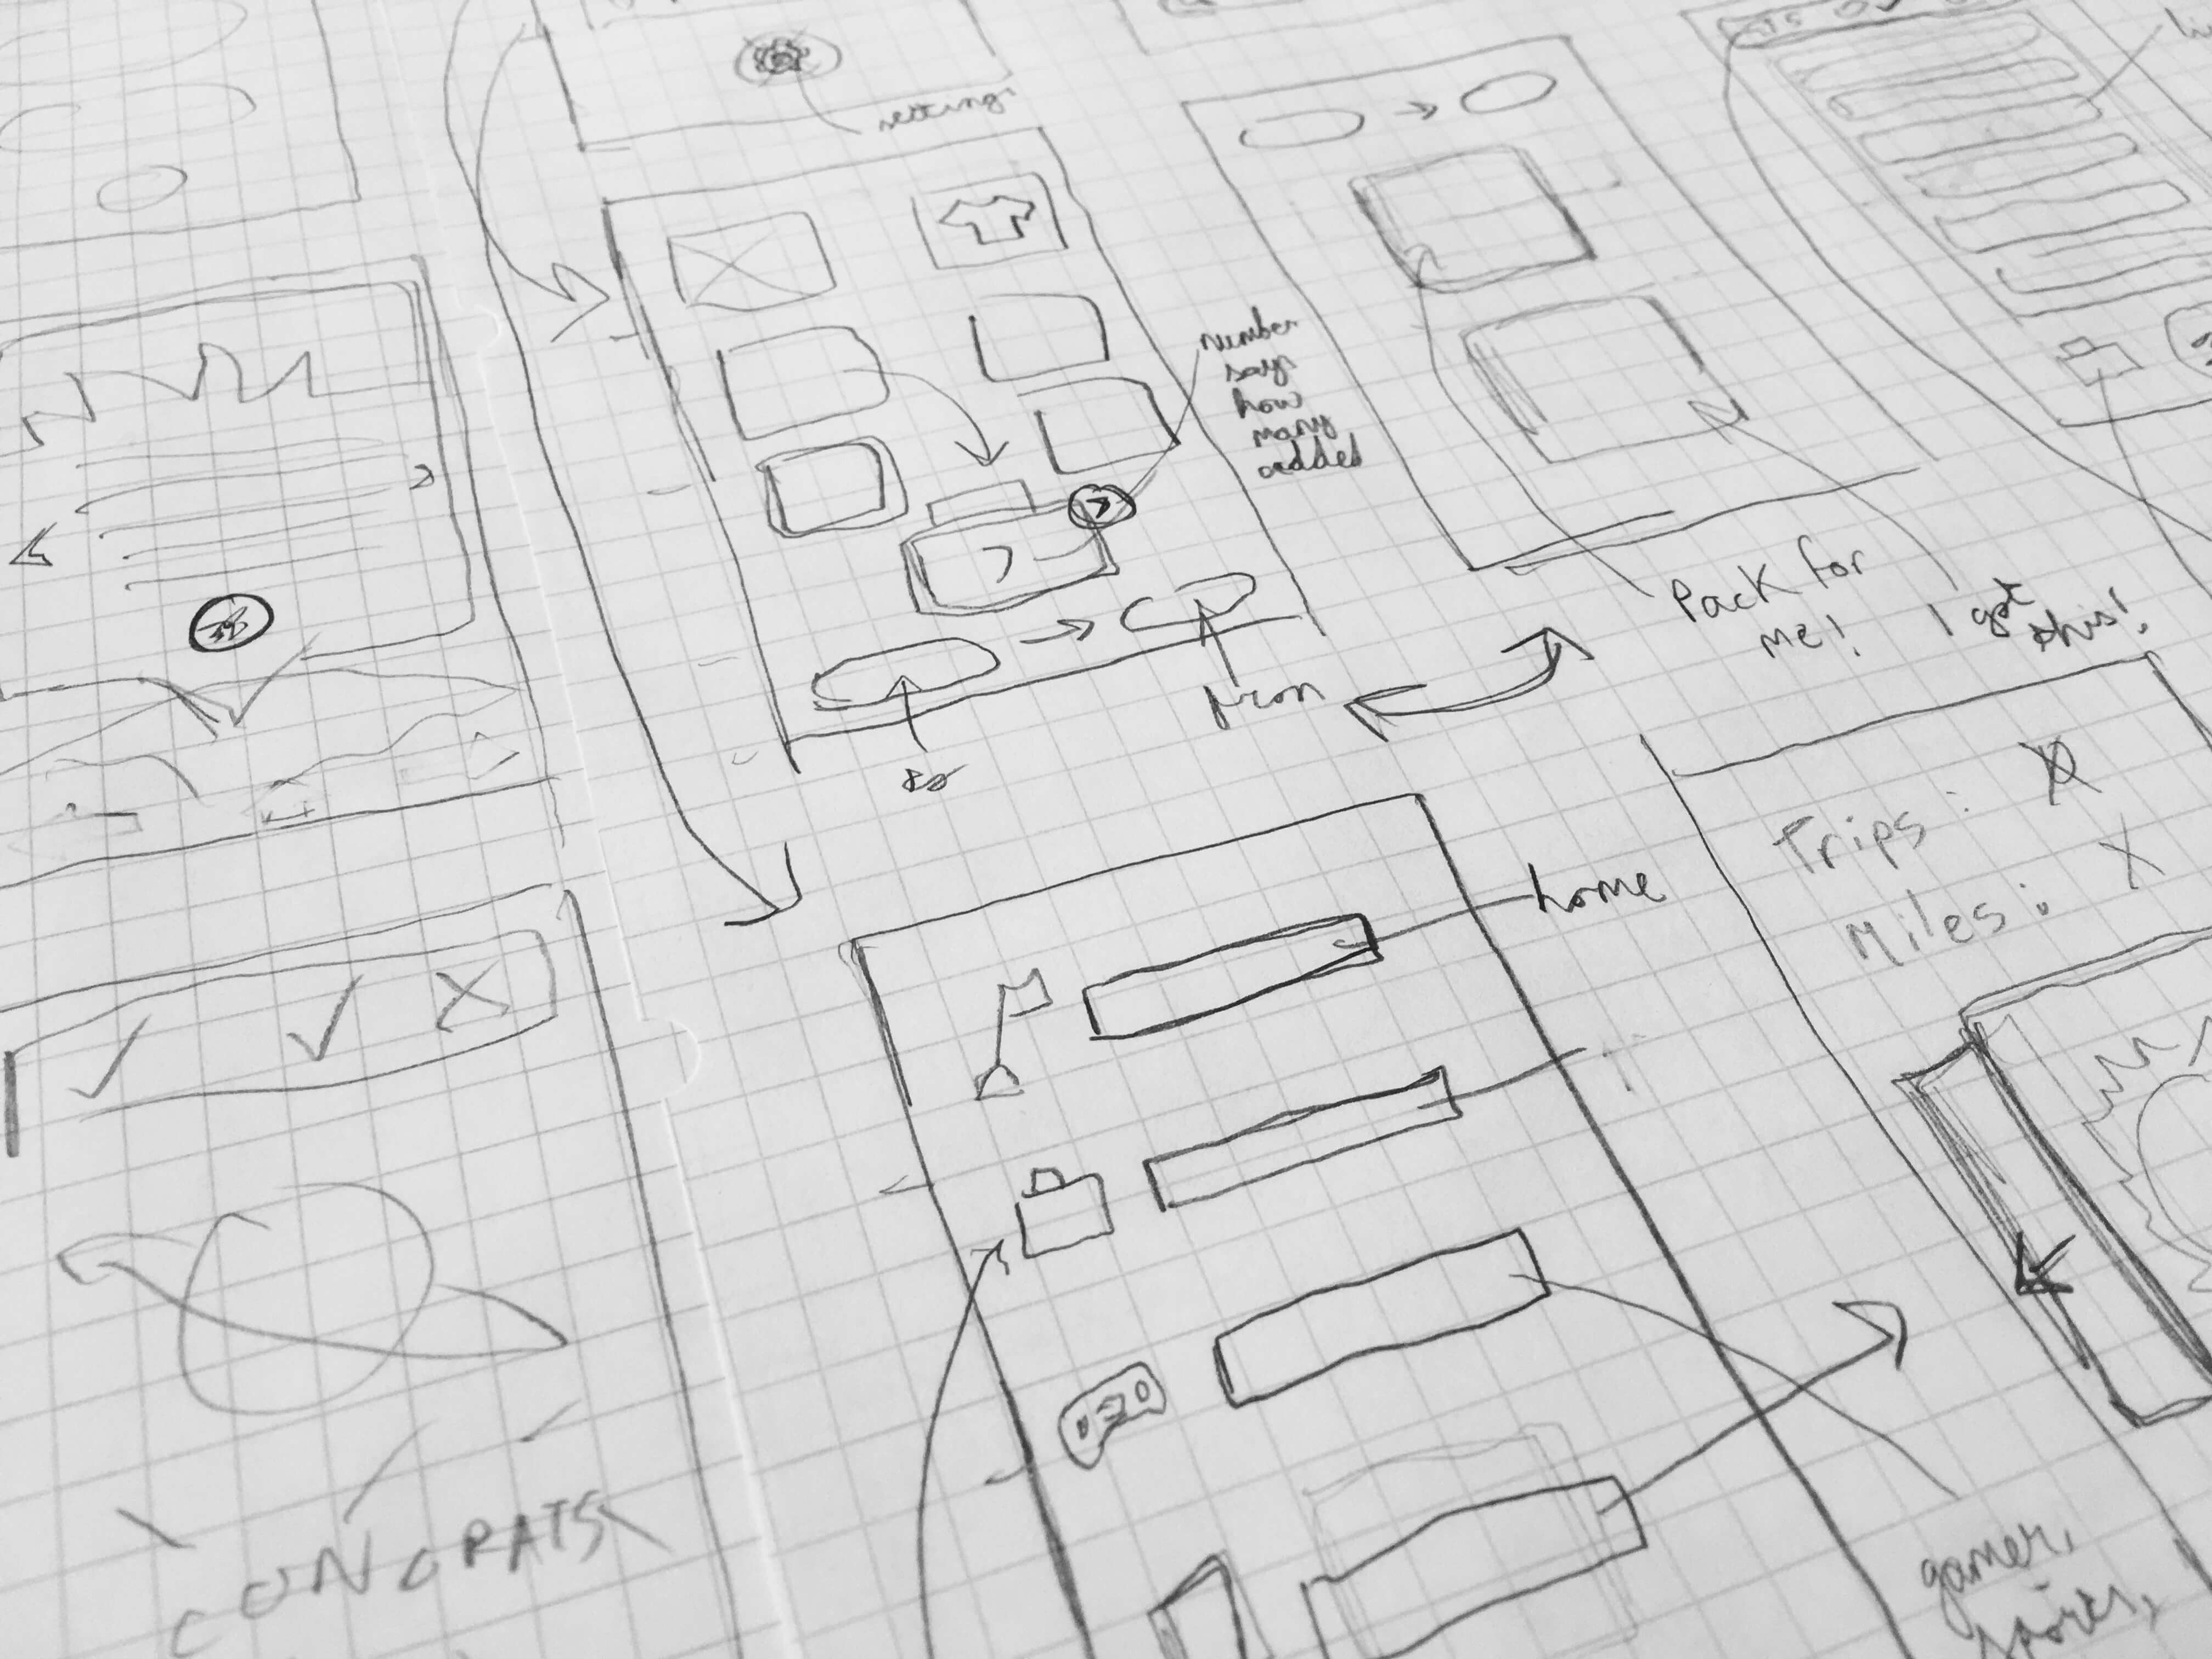 Paper prototyping and wireframe sketching